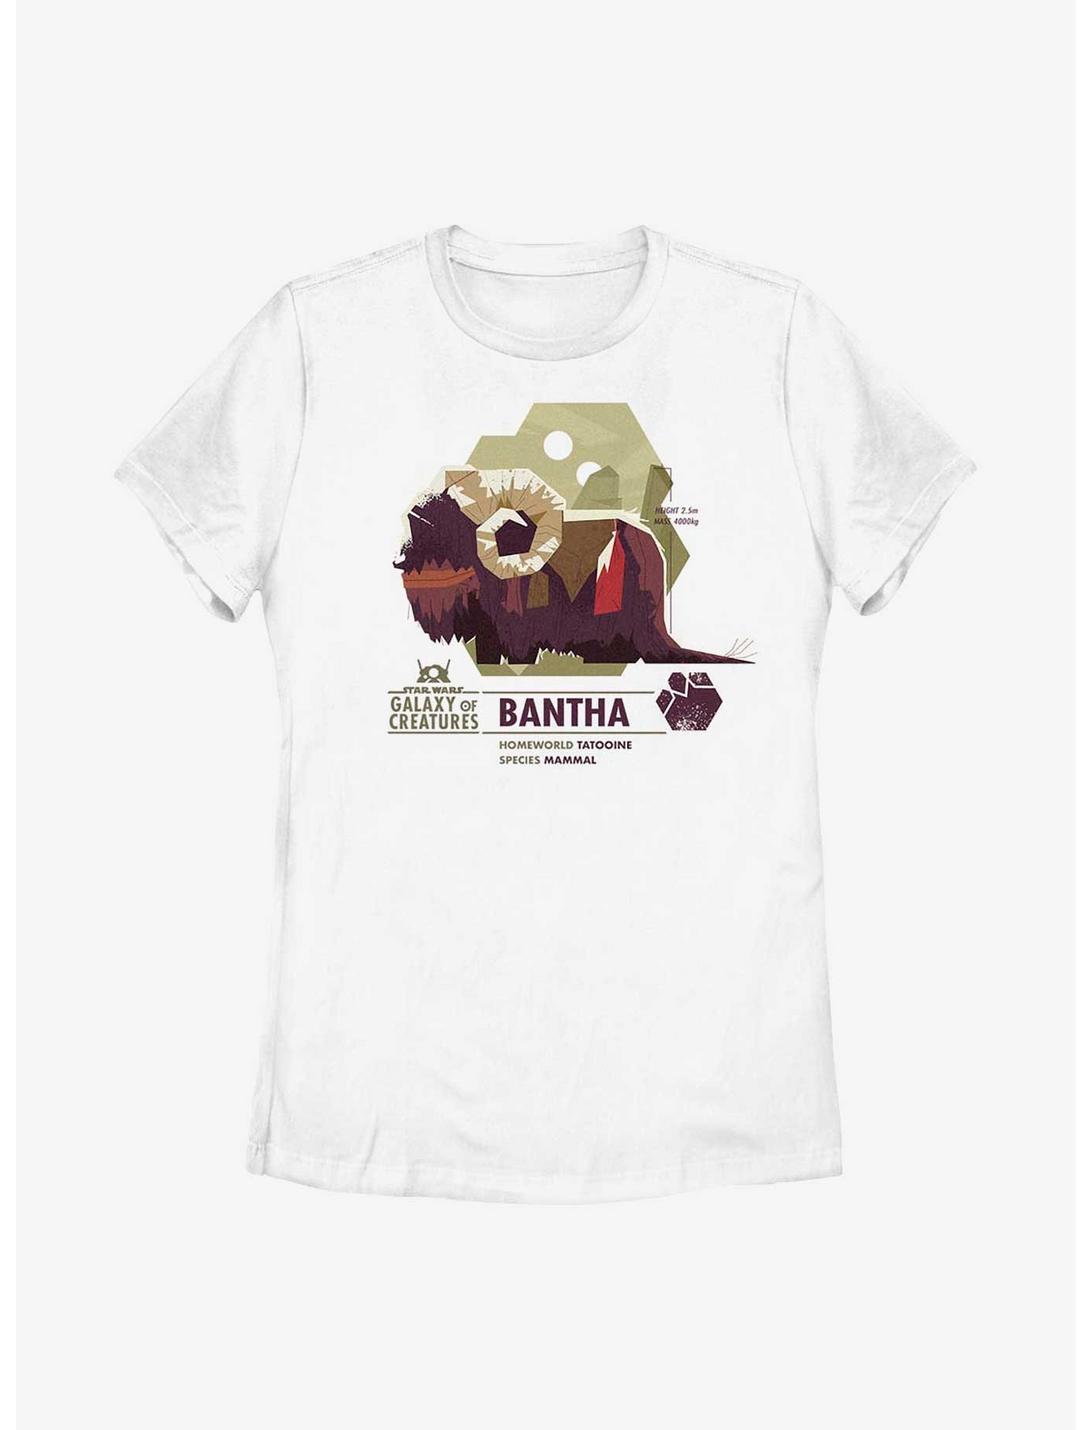 Star Wars Galaxy Of Creatures Bantha Species Womens T-Shirt, WHITE, hi-res